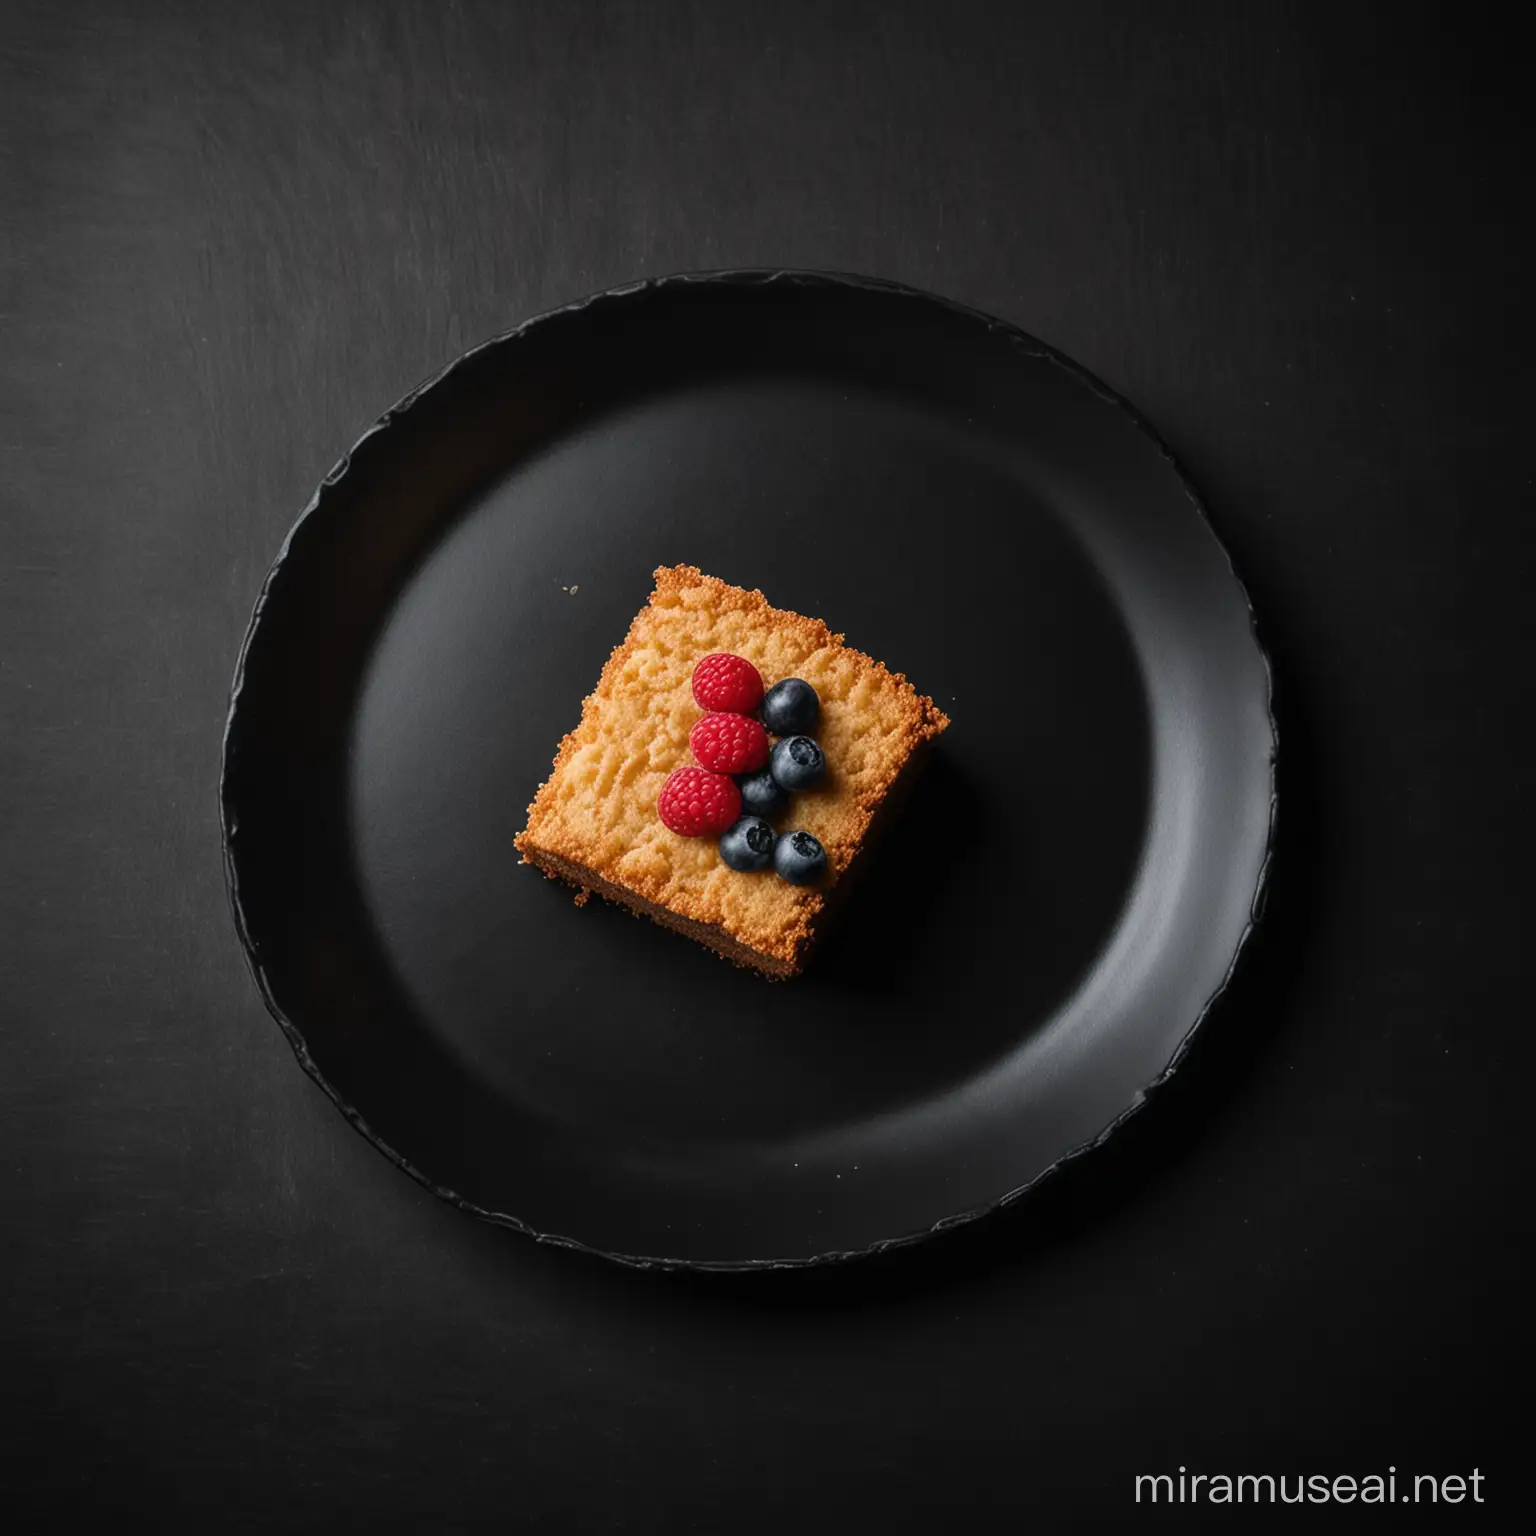 black plate with a cake in black background
